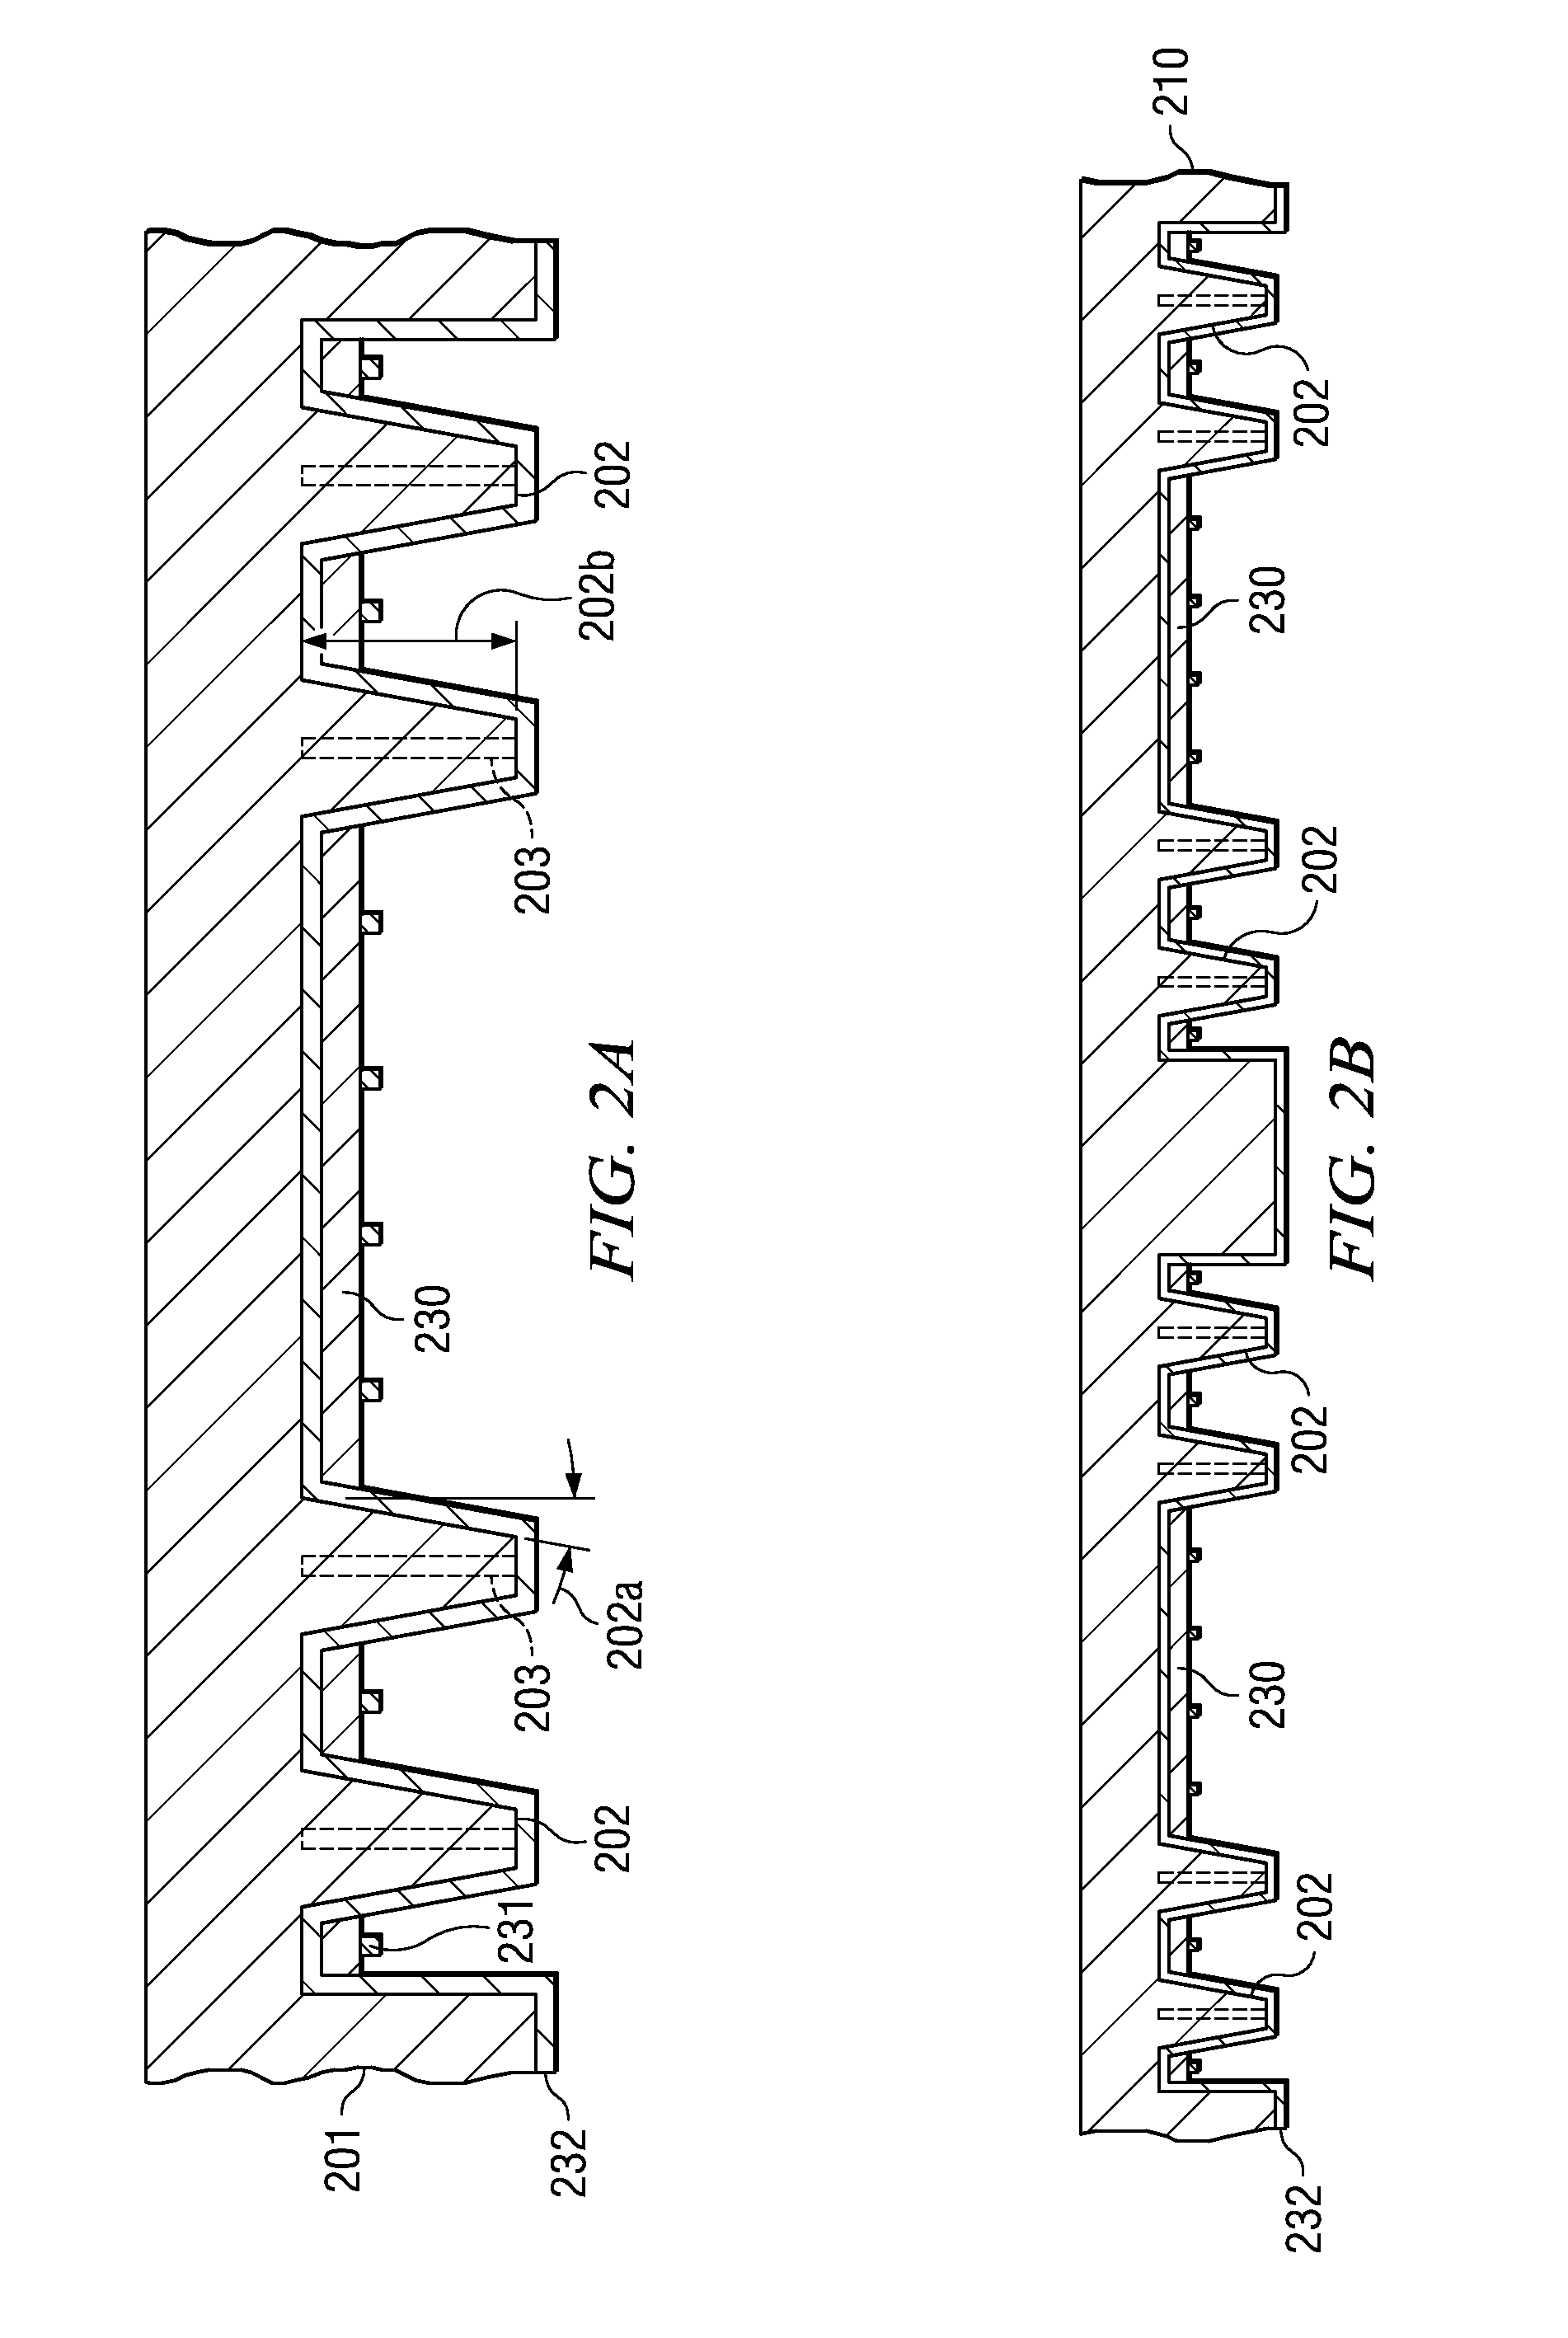 Array molded package-on-package having redistribution lines